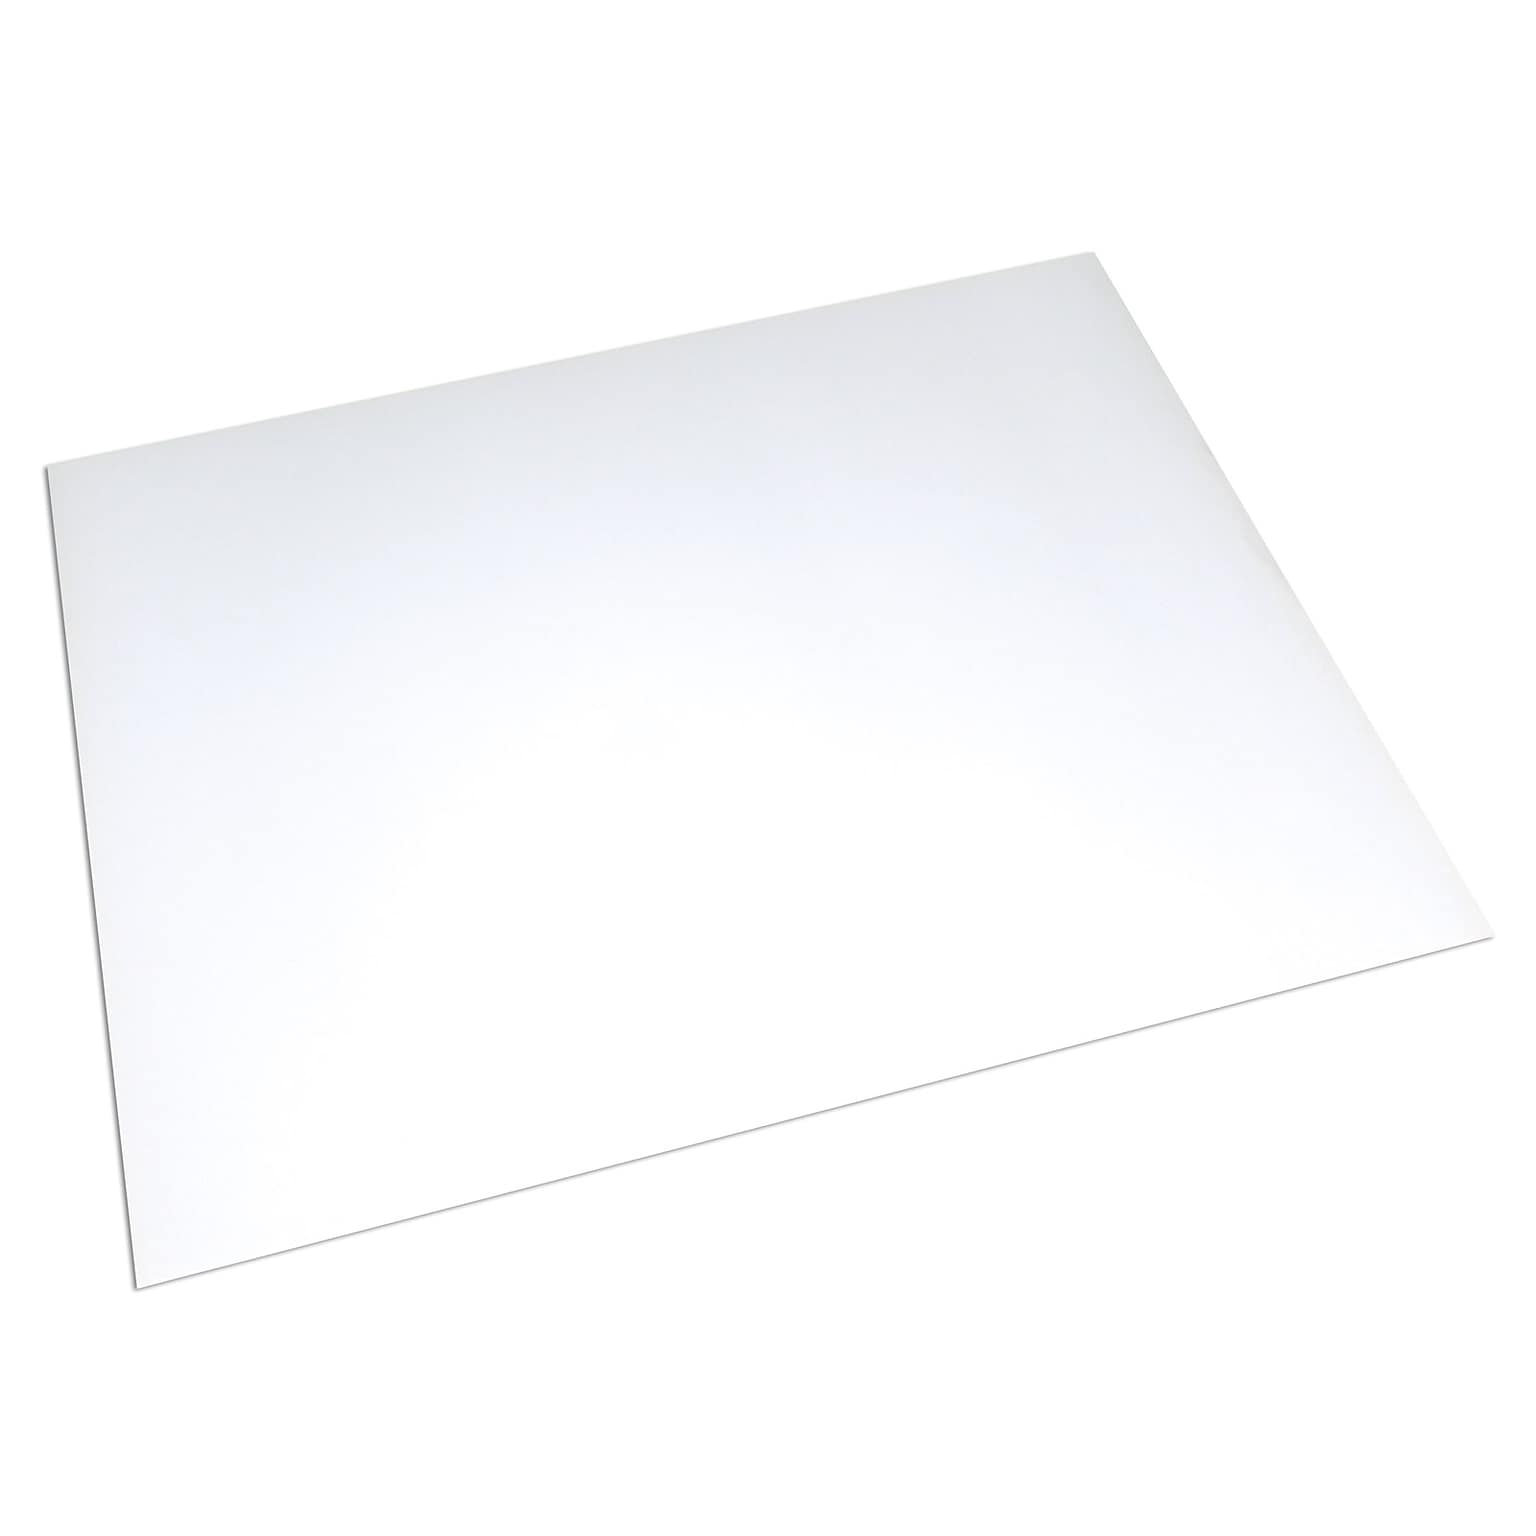 UCreate 10-Pt Paper Poster Board, 22 x 28, White, 50 Sheets (PACCAR13841)